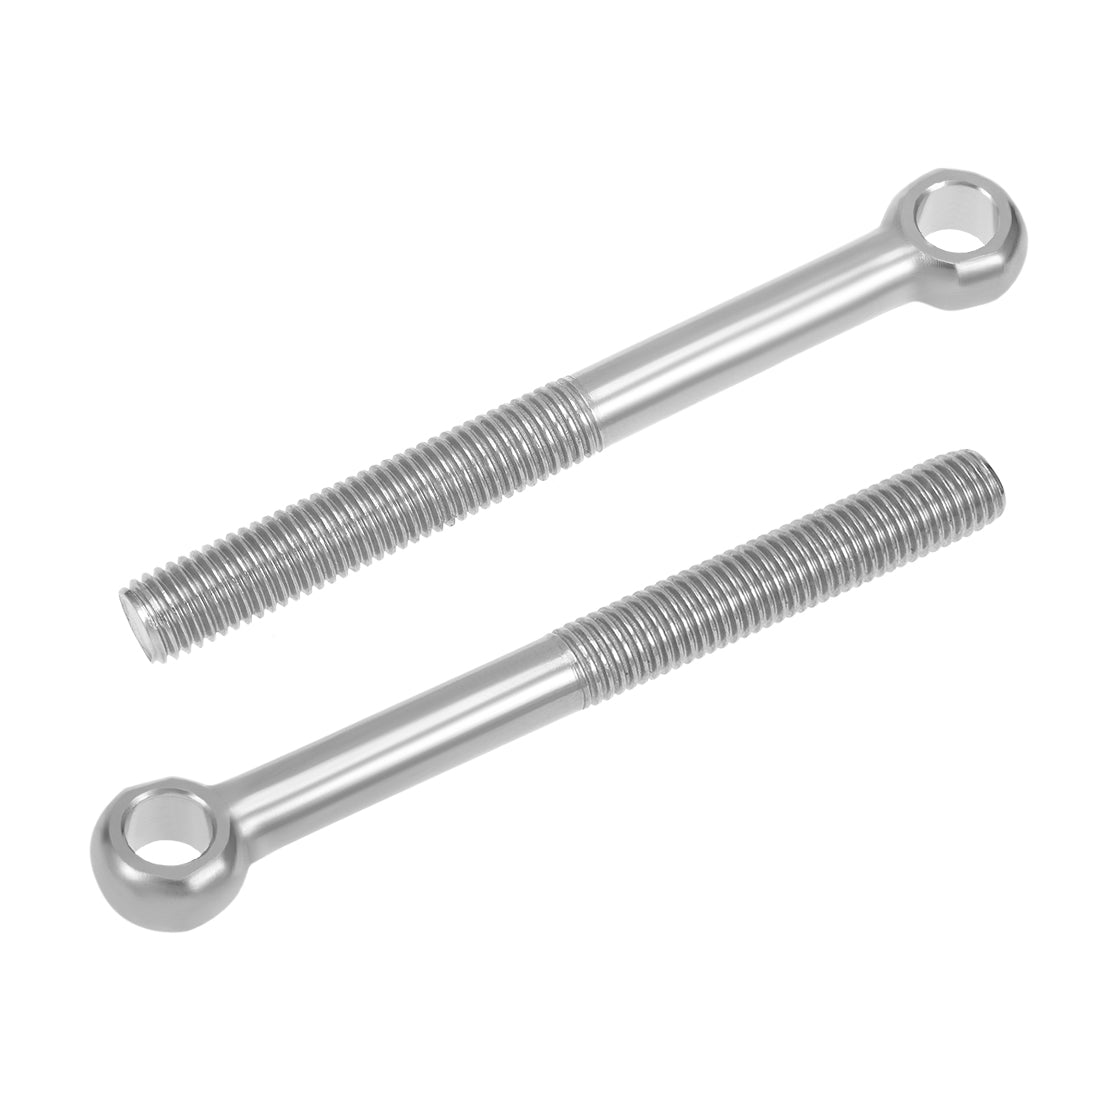 uxcell Uxcell M14 x 140mm Machinery Shoulder Swing Lifting Eye Bolt 304 Stainless Steel Metric Thread 2pcs